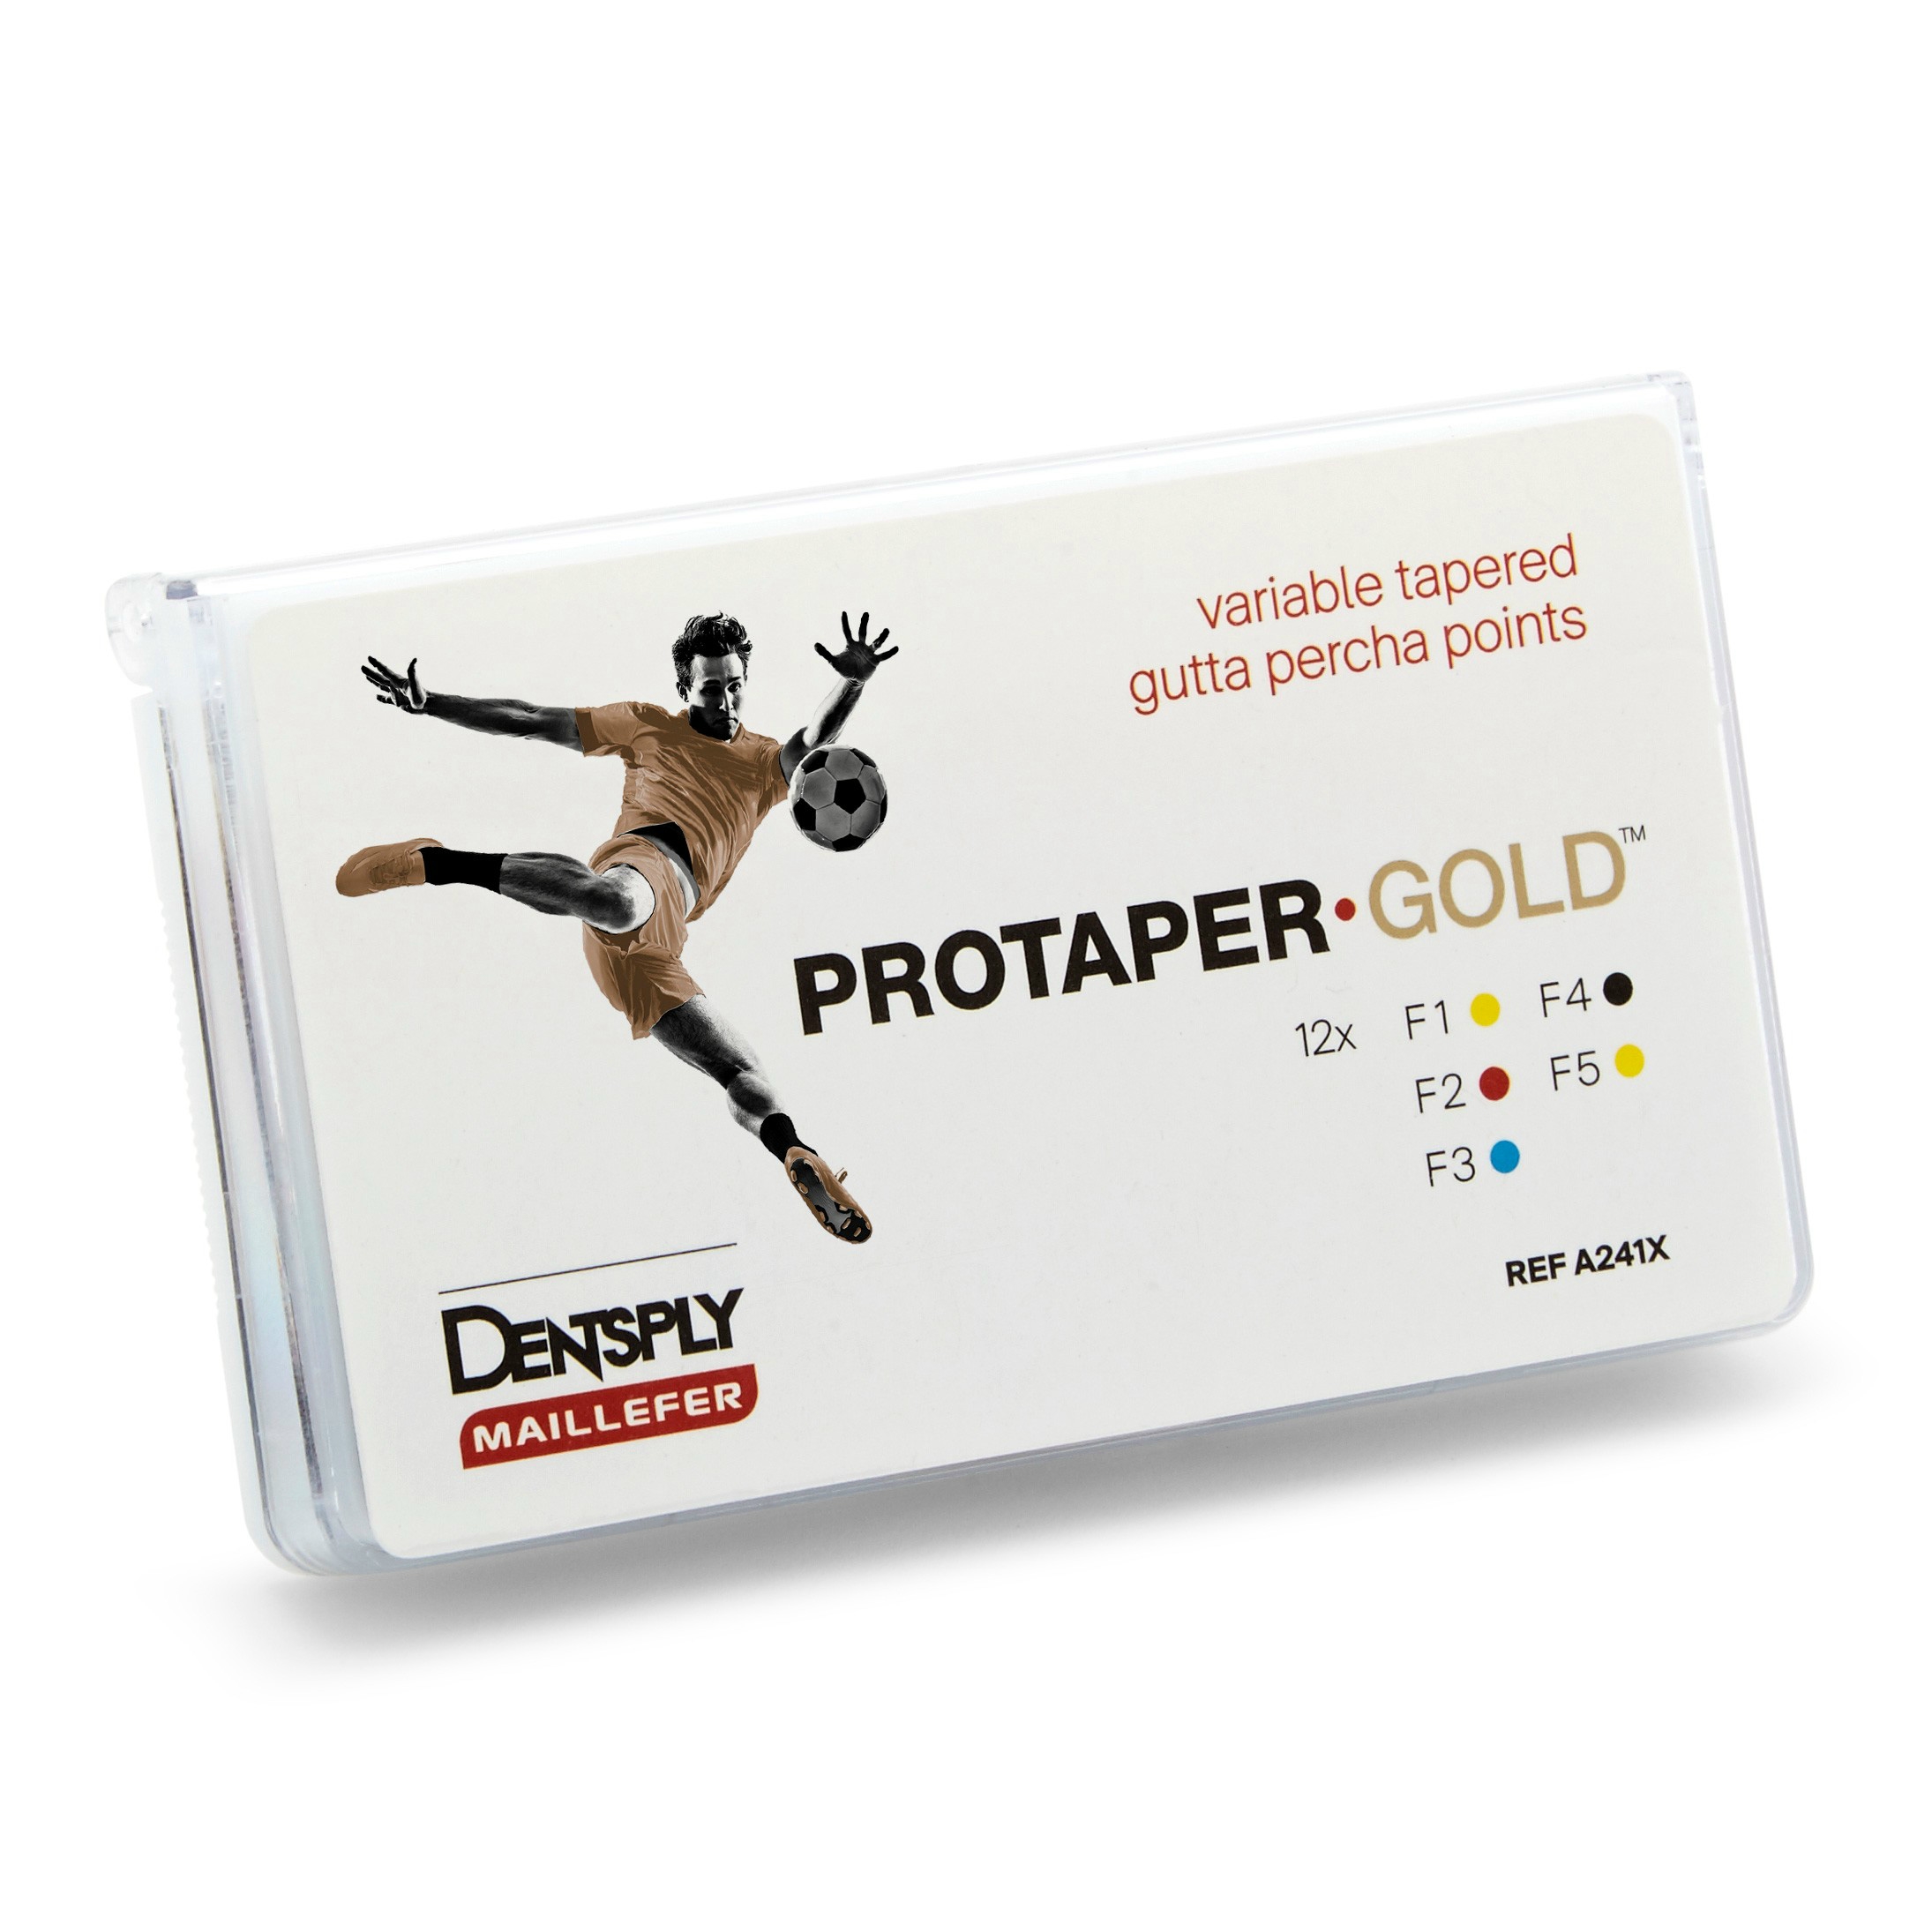 Protaper gold paper point F4